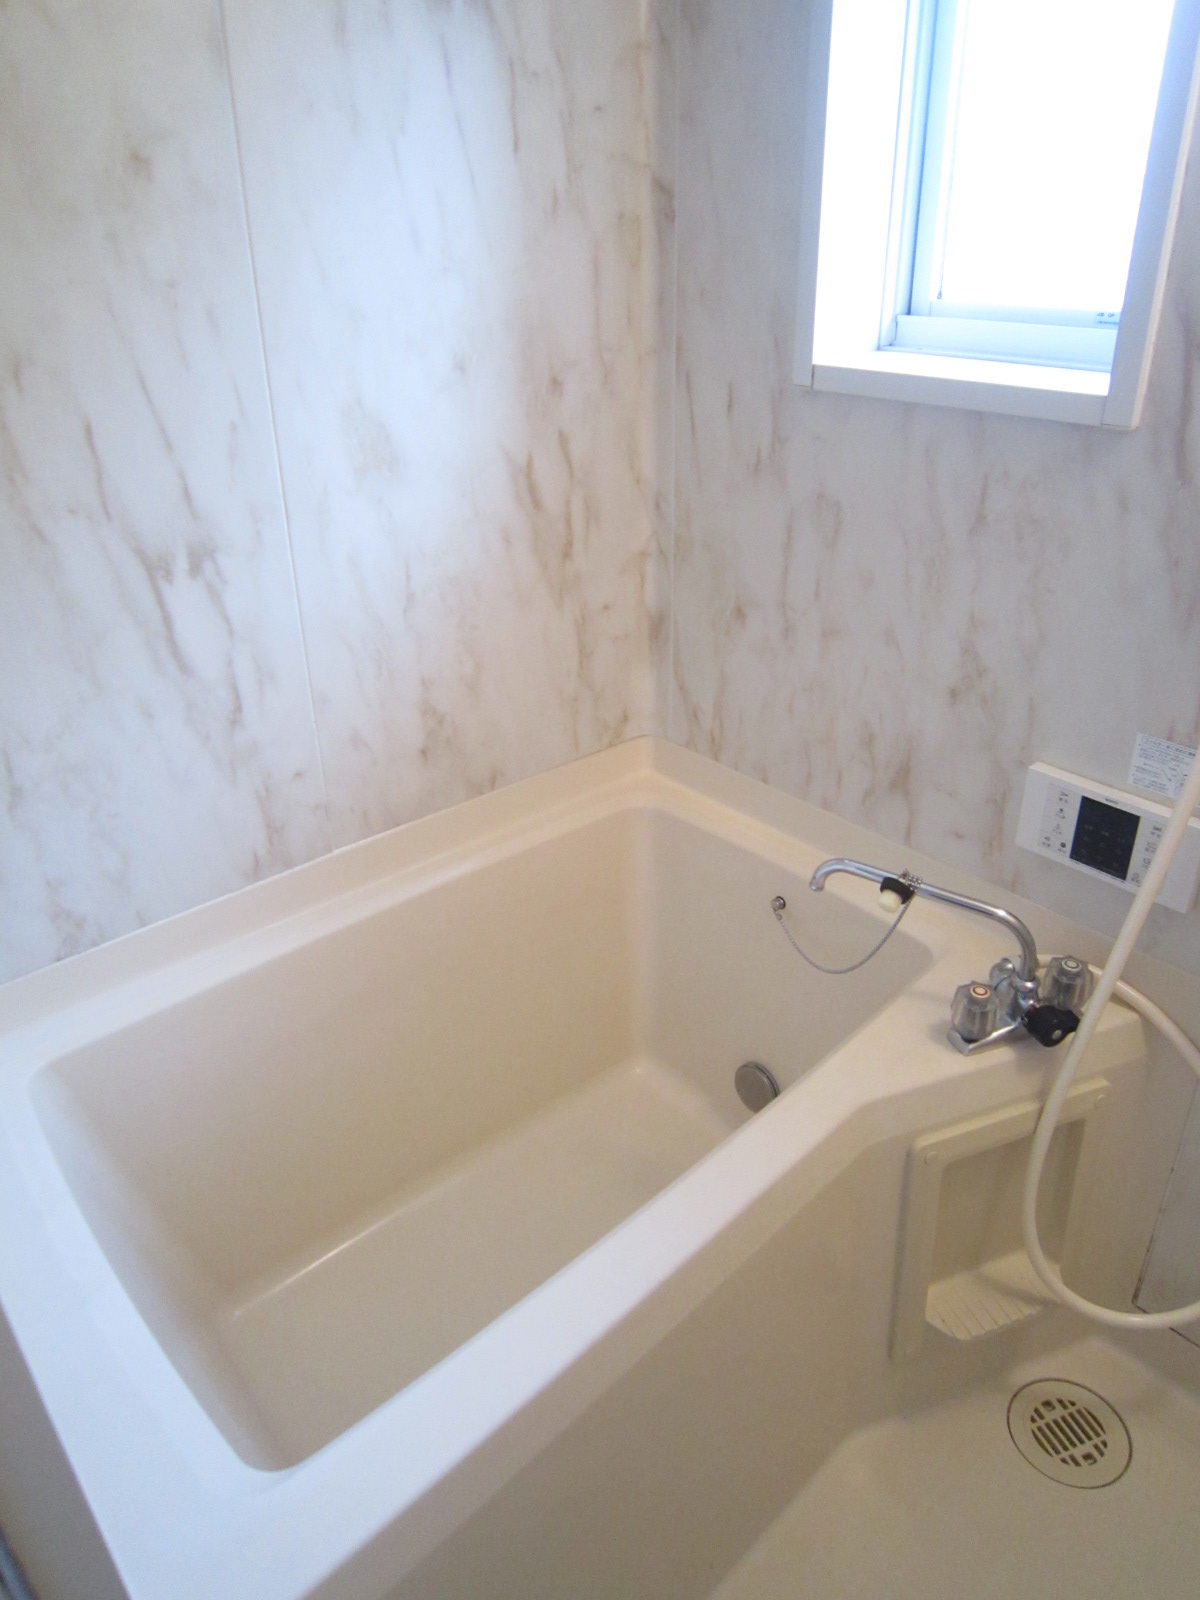 Bath. With add-fired function [There is a window in the bathroom]